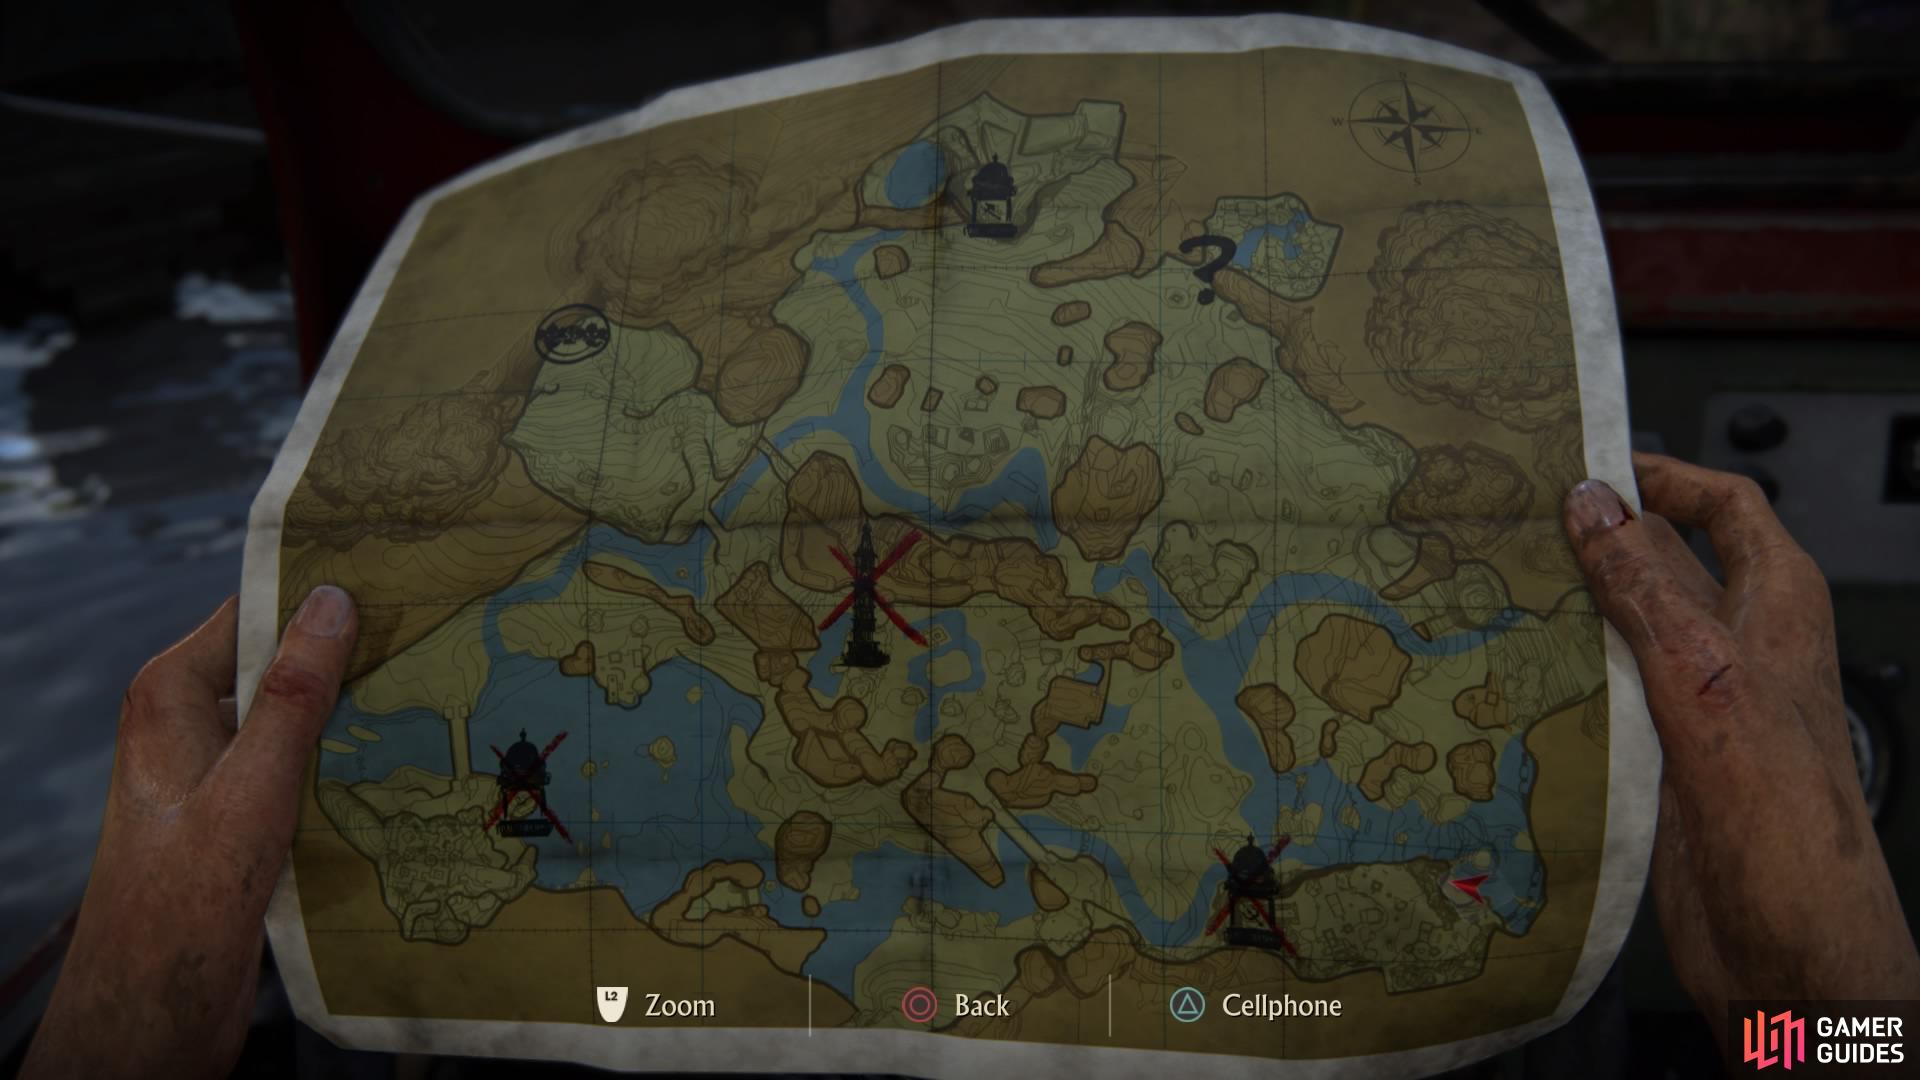 Shiva's axe is located at the top of the map